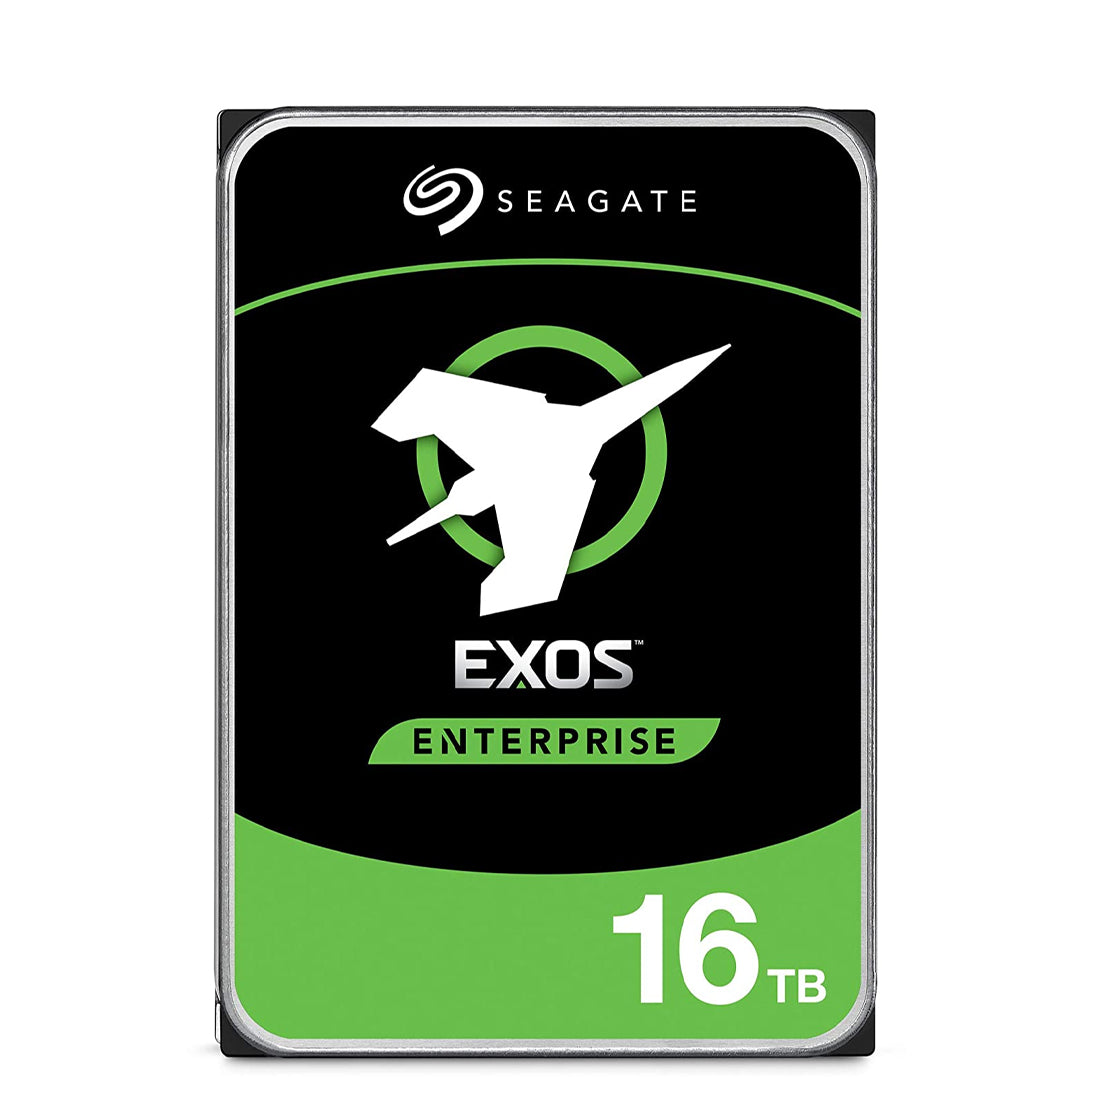 Seagate Exos X16 16TB 3.5-inch Enterprise Hard Drive with 7200 RPM and 256MB Cache